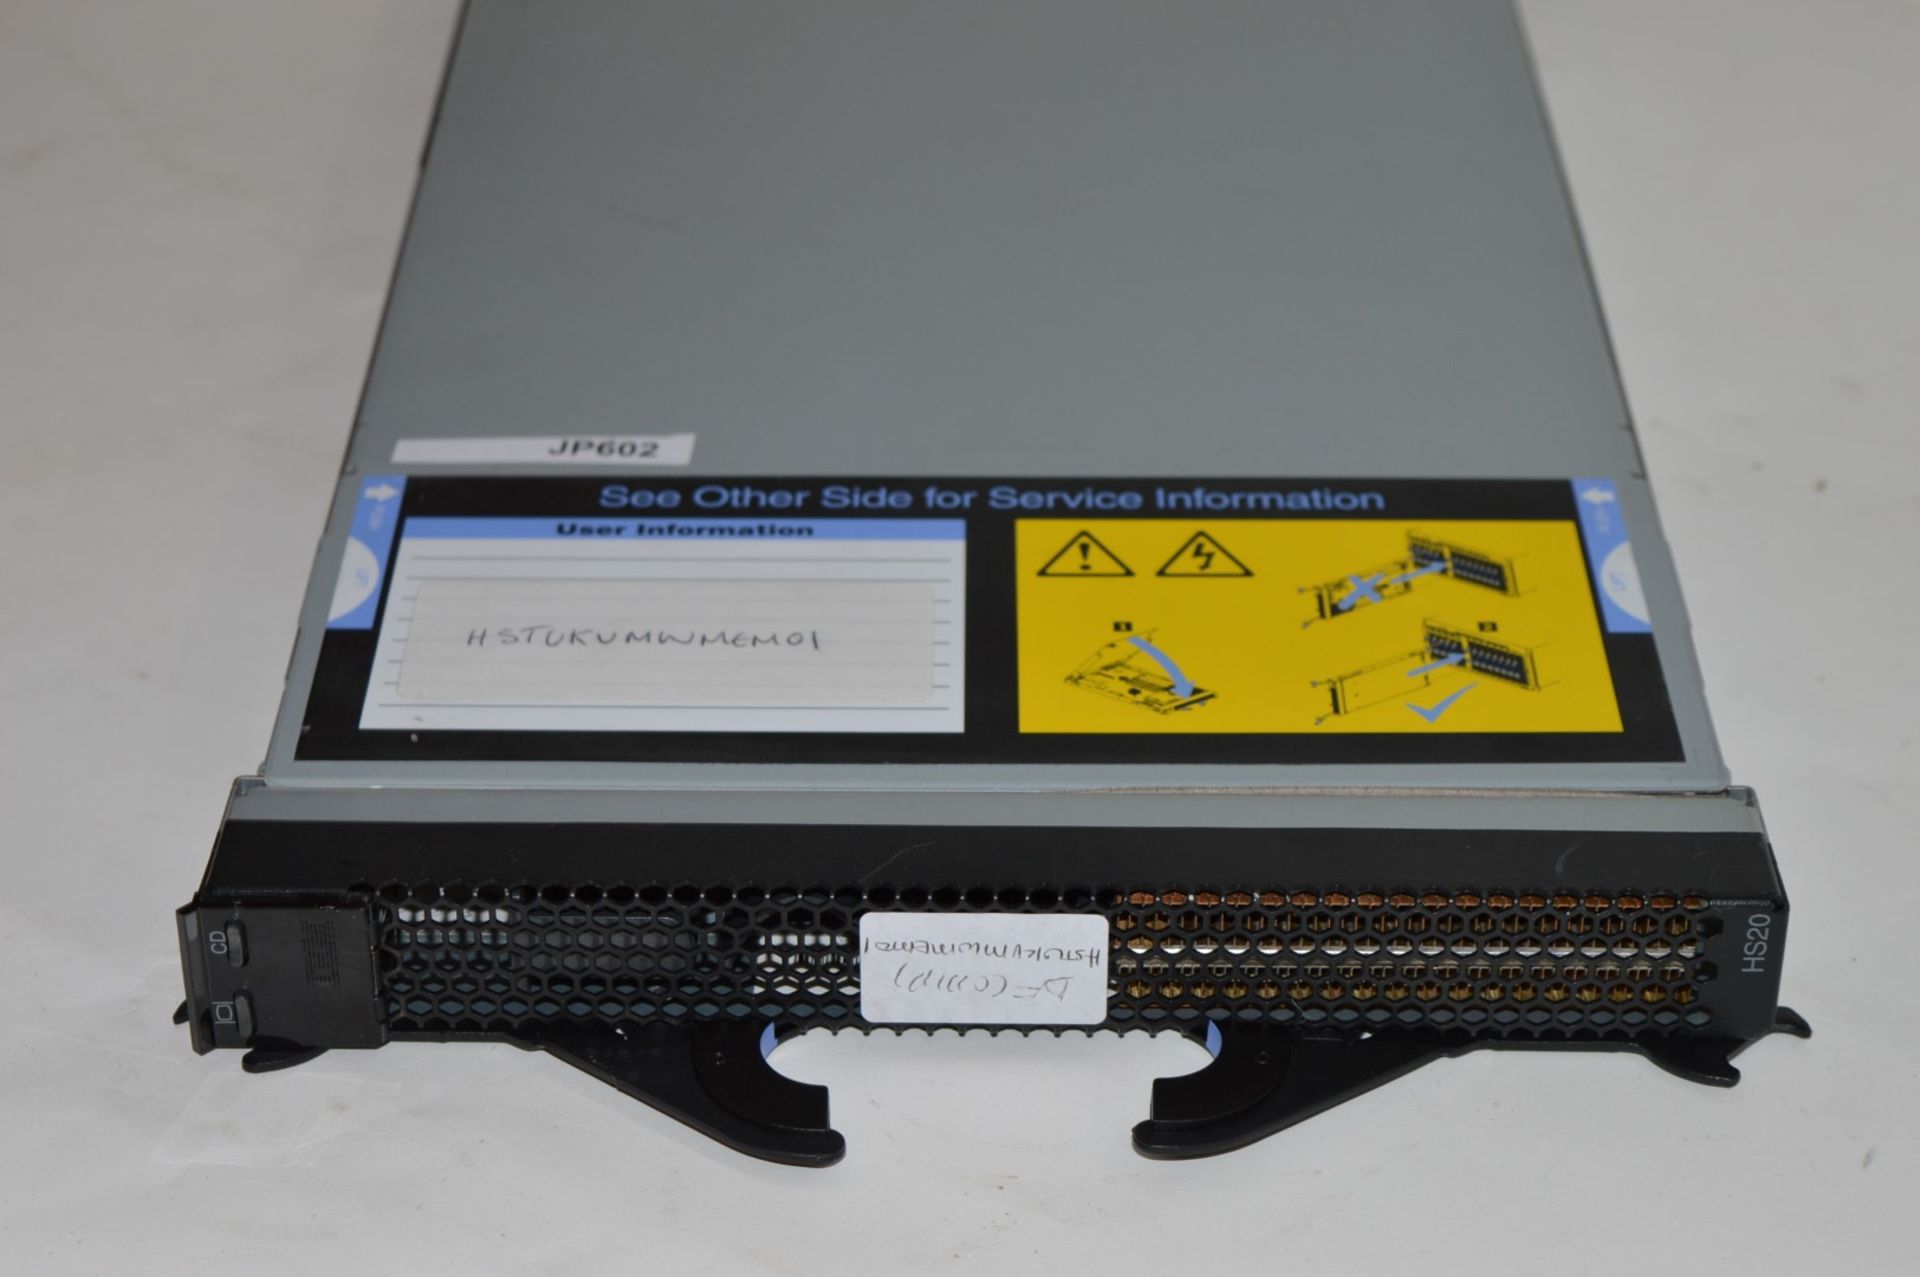 1 x IBM HS20 Blade Server - Model 35G - Includes 1 x Xeon Processors and 3gb Ram - CL400 - Ref JP607 - Image 4 of 4